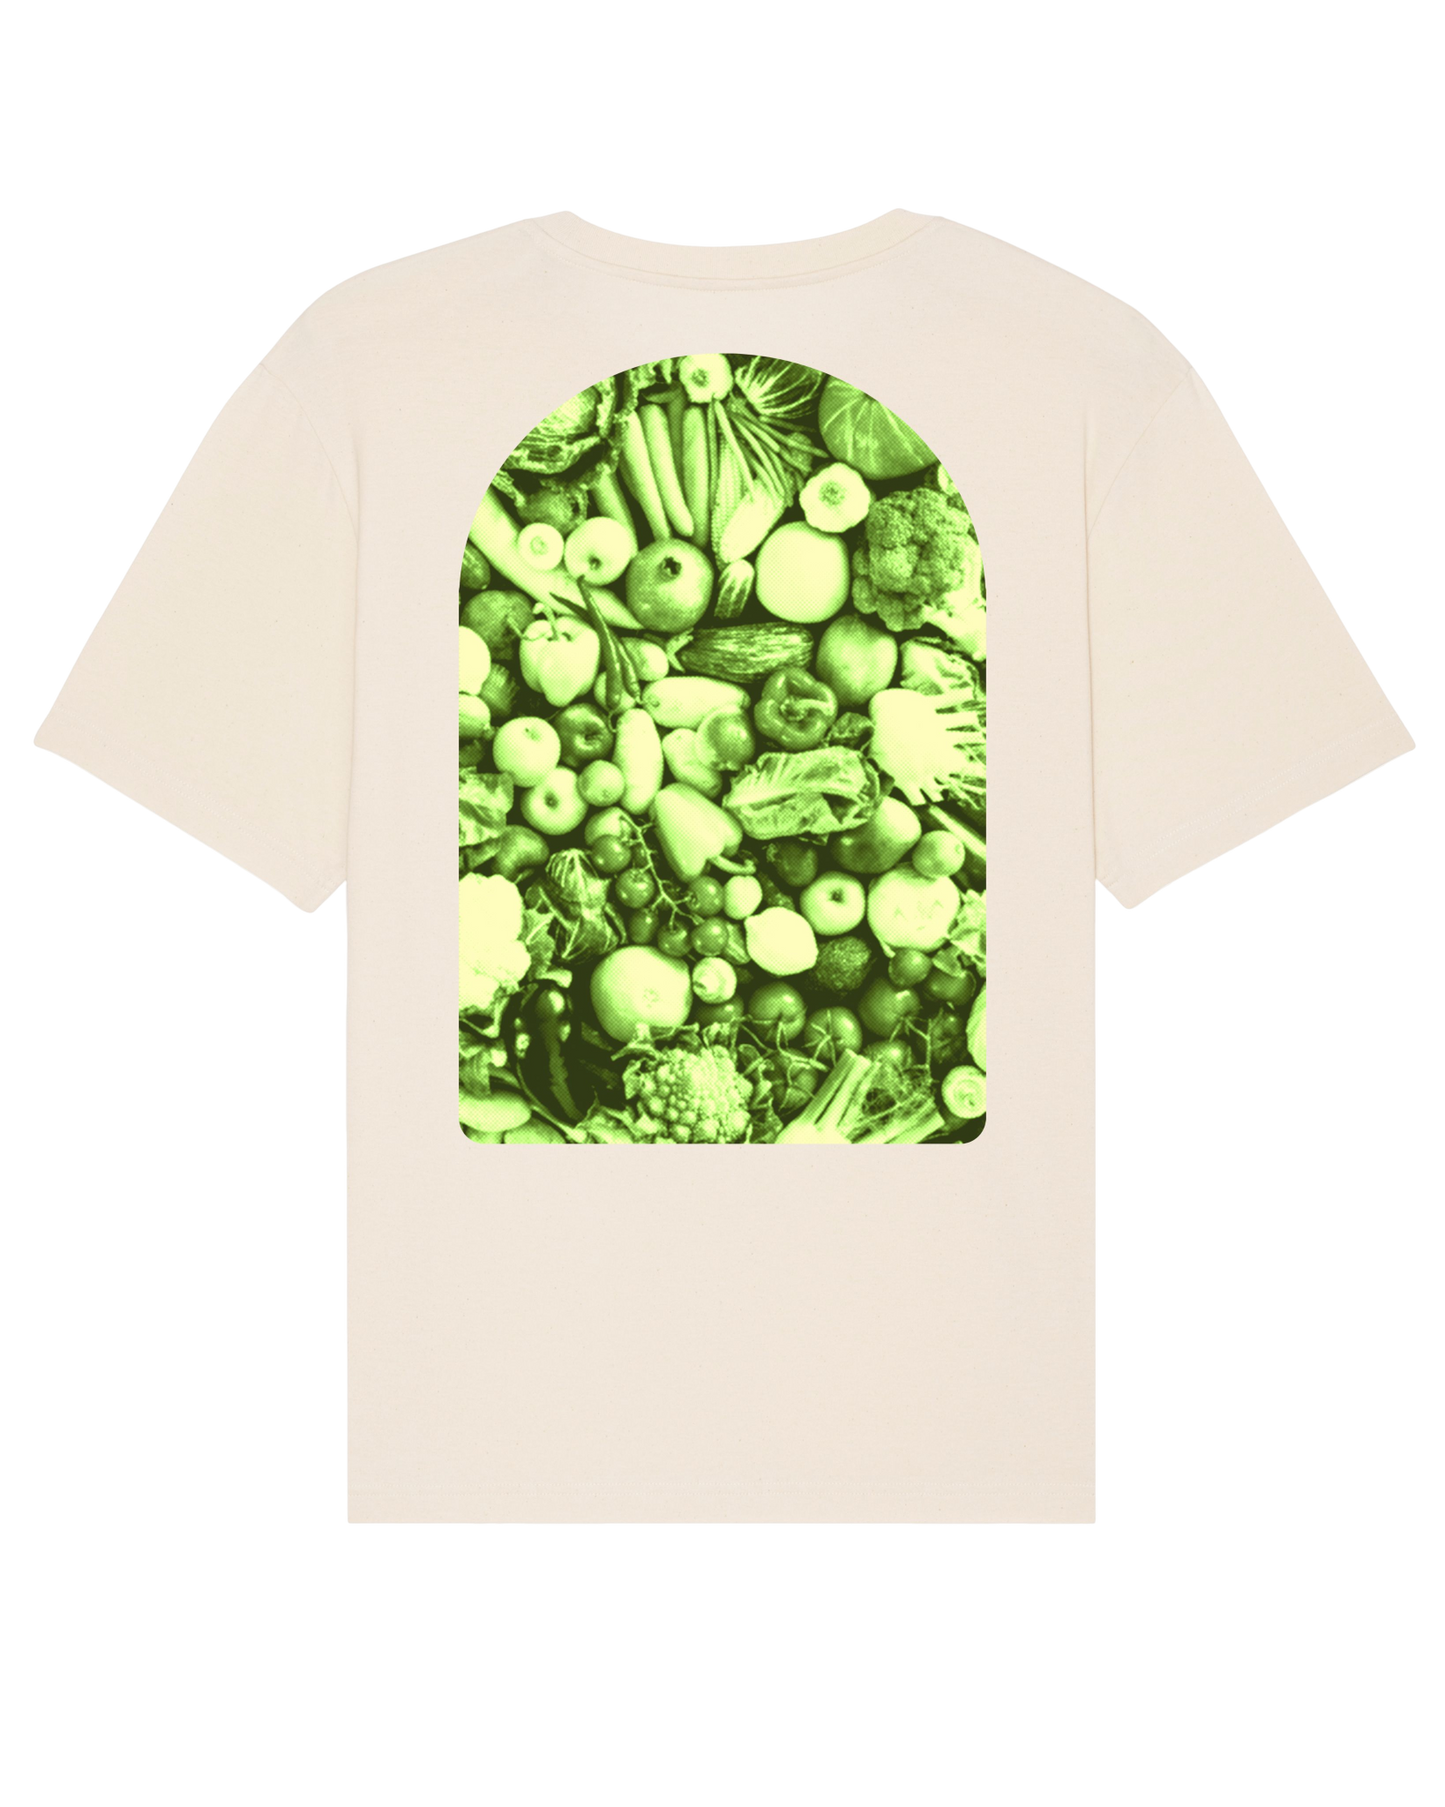 Eat Your Vegetables Natural Raw TEE by Family Store